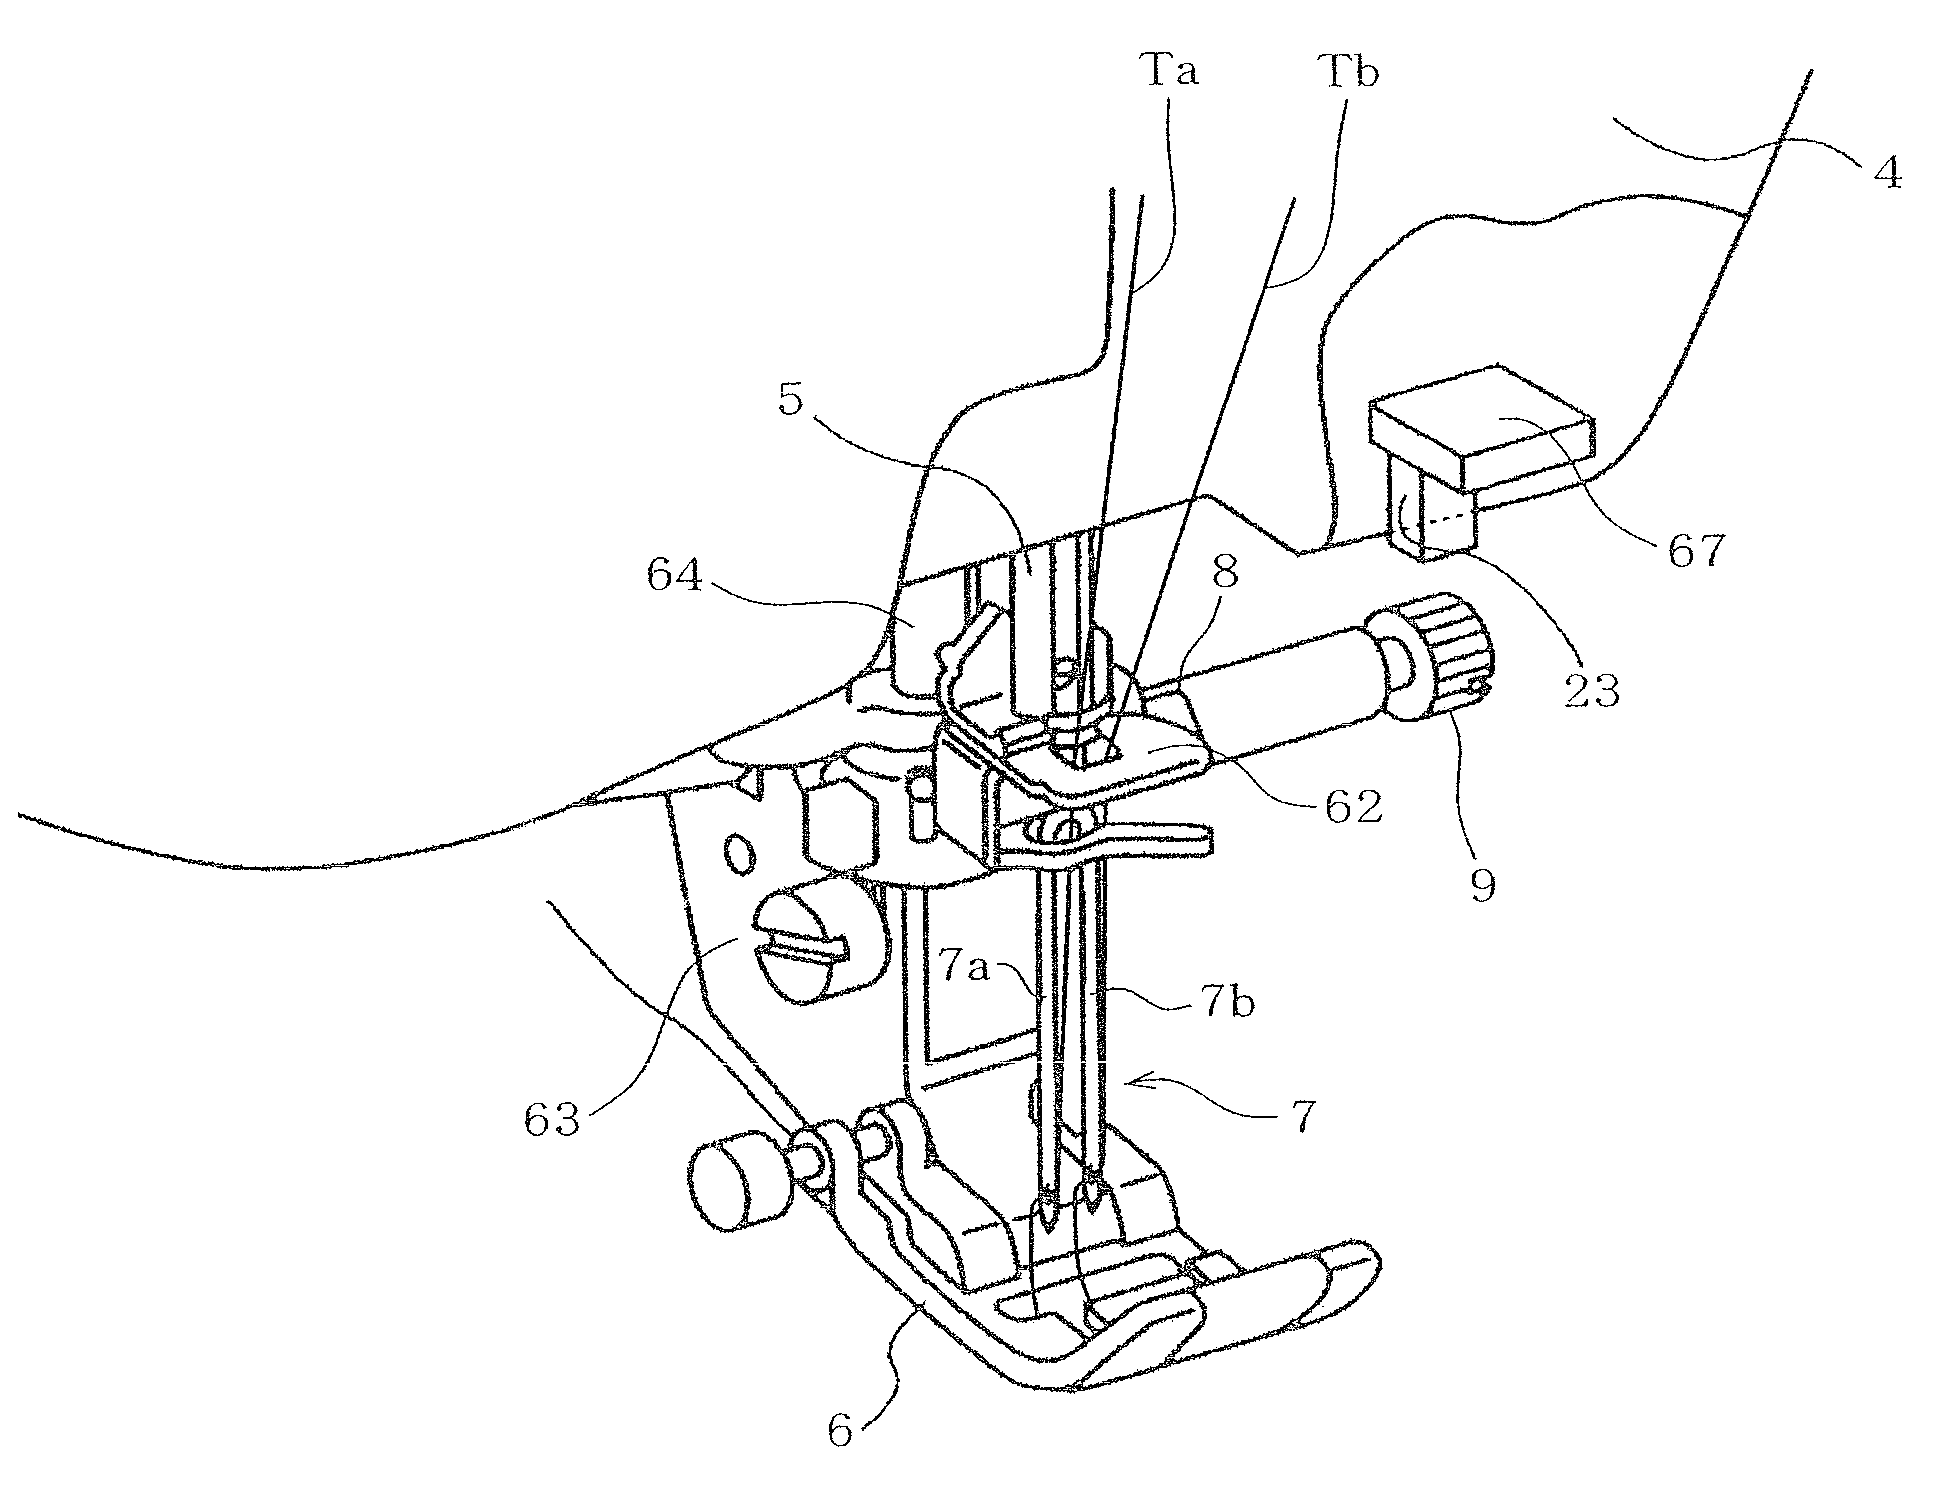 Sewing machine provided with needle bar rocking mechanism